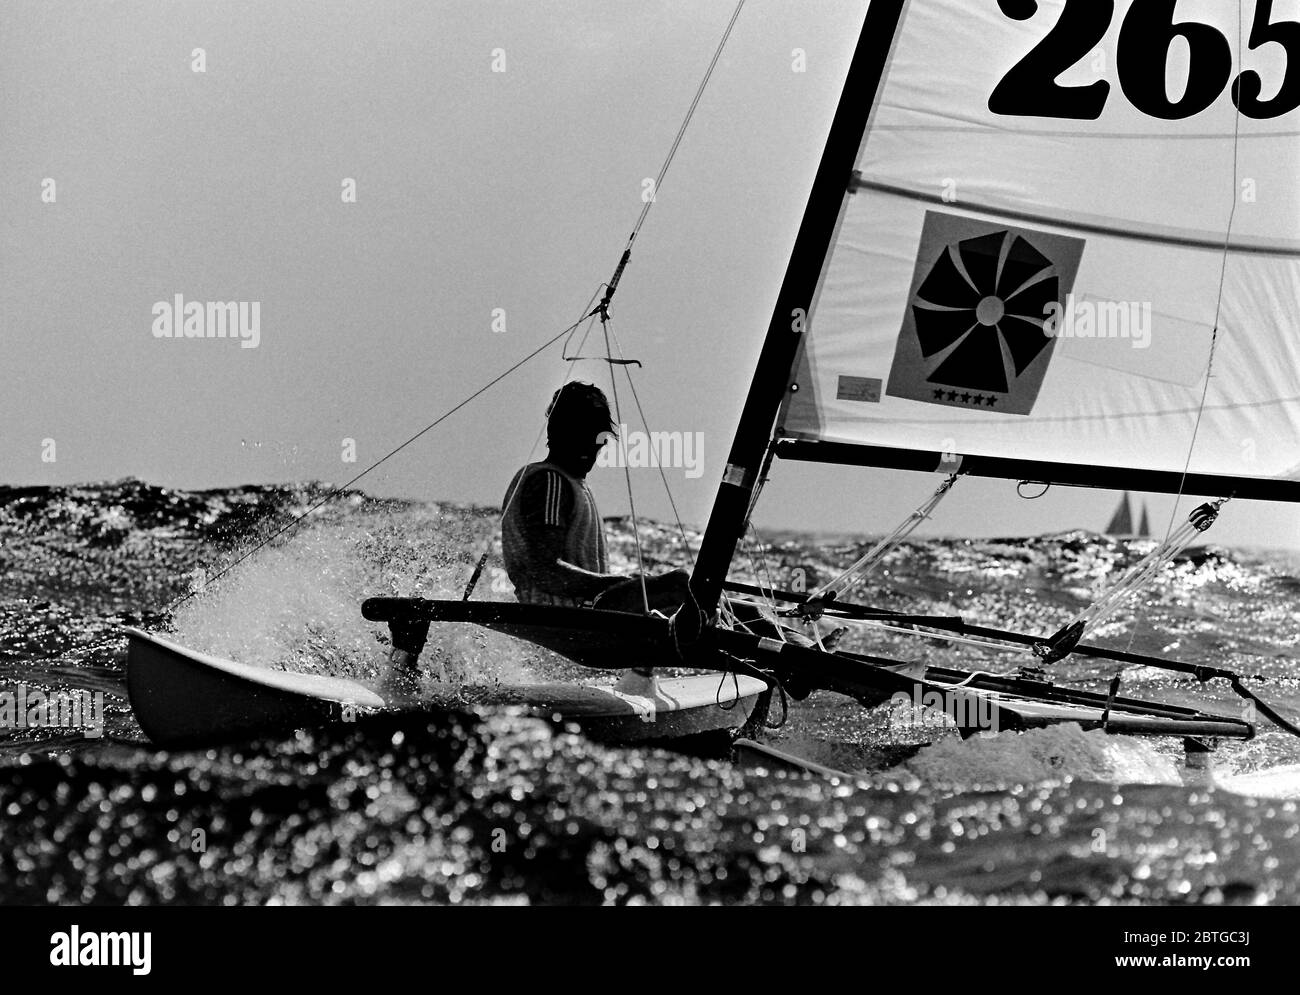 AJAXNETPHOTO. 1977. LAS SALINAS BAY, LANZAROTE, SPAIN. - A COMPETITOR RACING IN A STIFF BREEZE AND CHOPPY WATERS IN THE HOBIE CAT 14 WORLD CHAMPIONSHIPS. PHOTO:JONATHAN EASTLAND/AJAX REF:7726091 74 Stock Photo